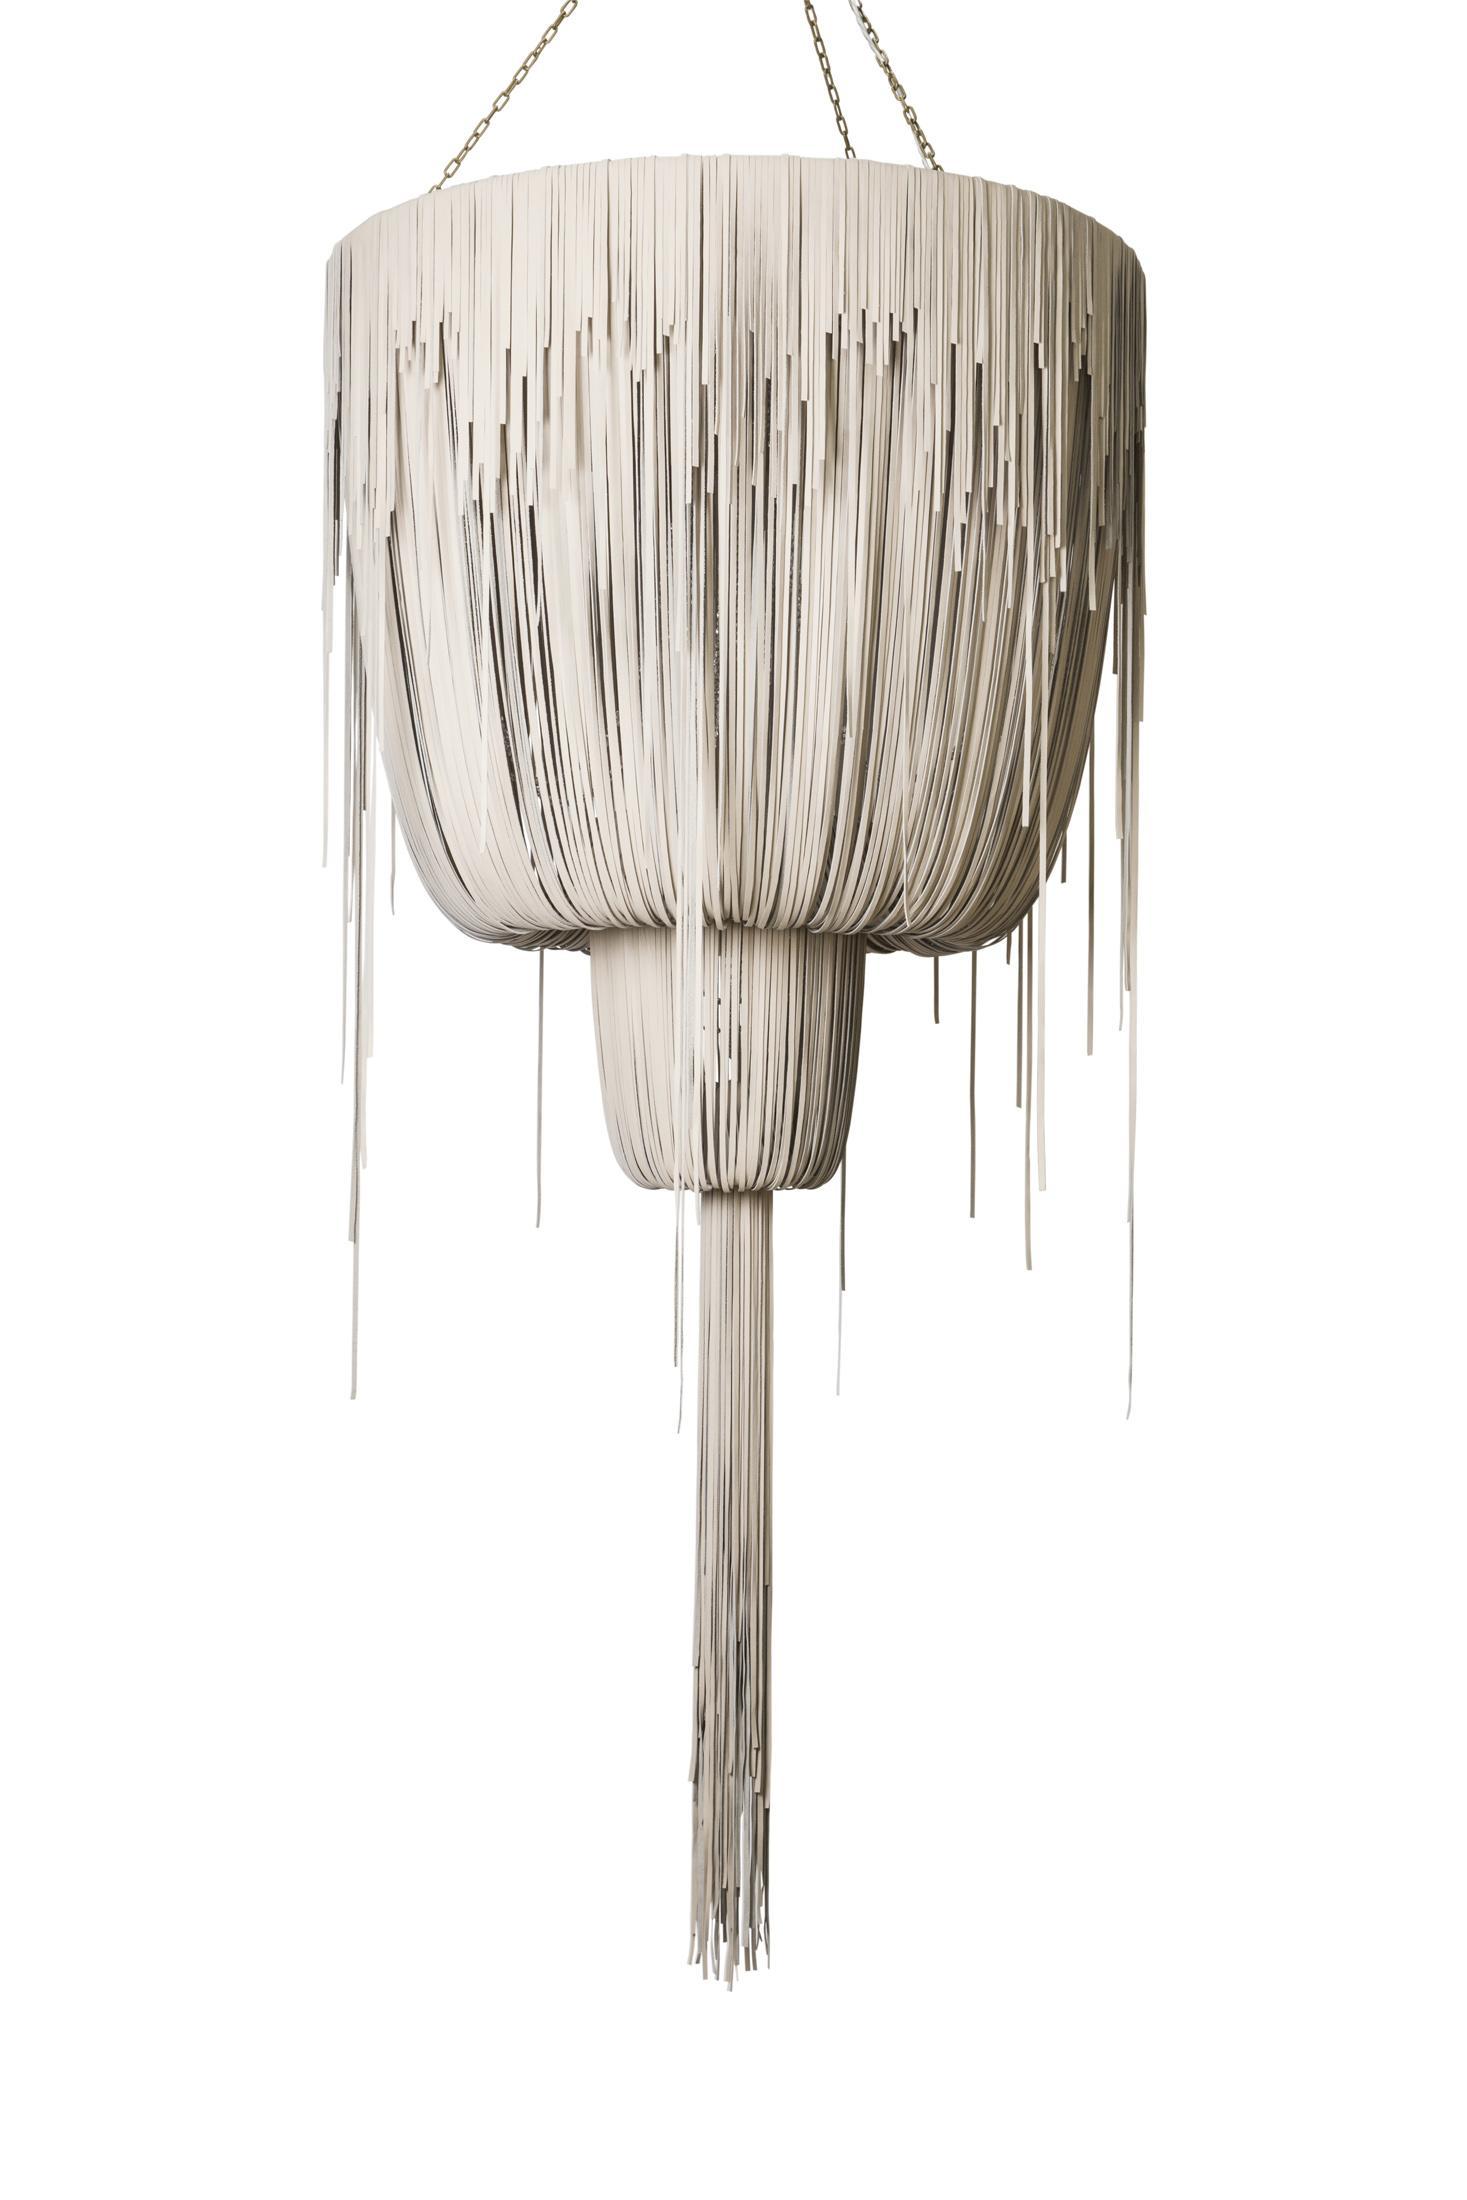 Large Round Double-Ball Urchin Leather Chandelier in Cream-Stone Leather